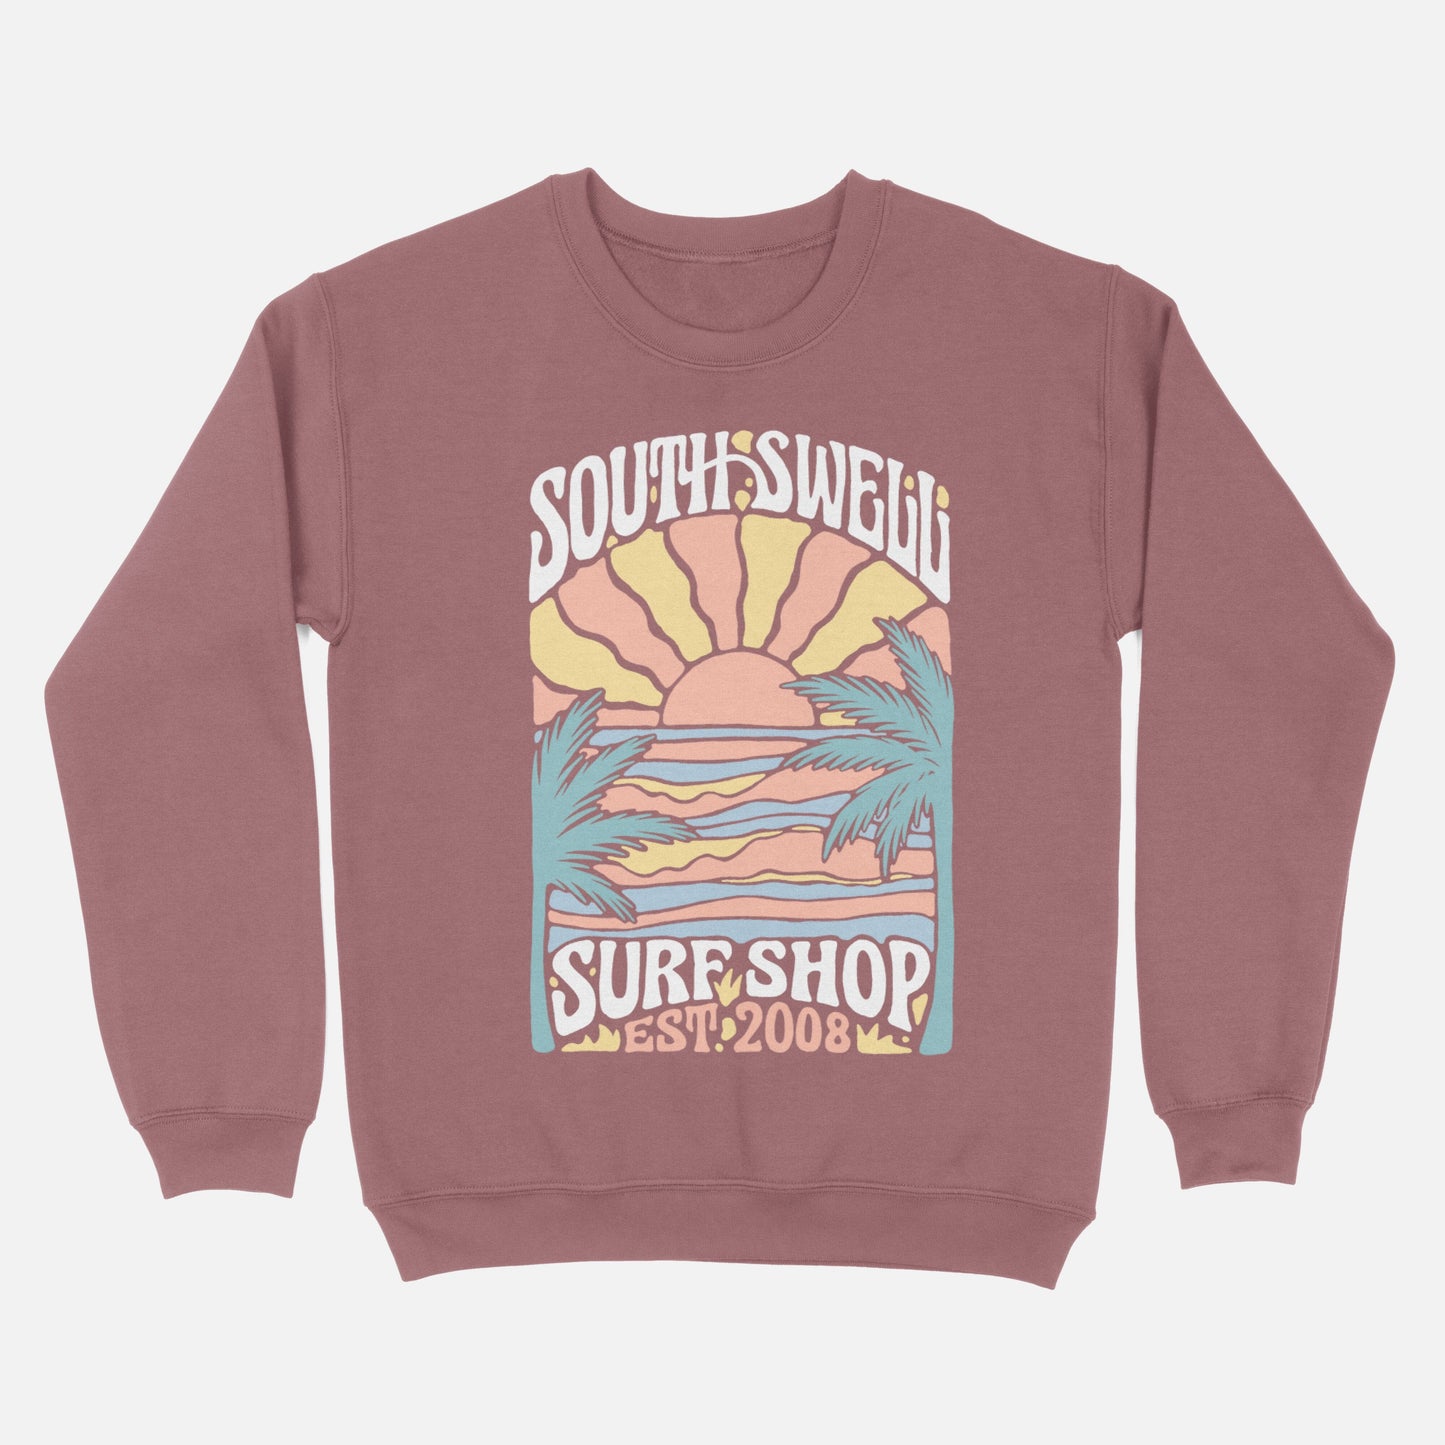 South Swell Sunrise Pigment Dyed Crewneck W Sweaters & Fleece SOUTH SWELL 